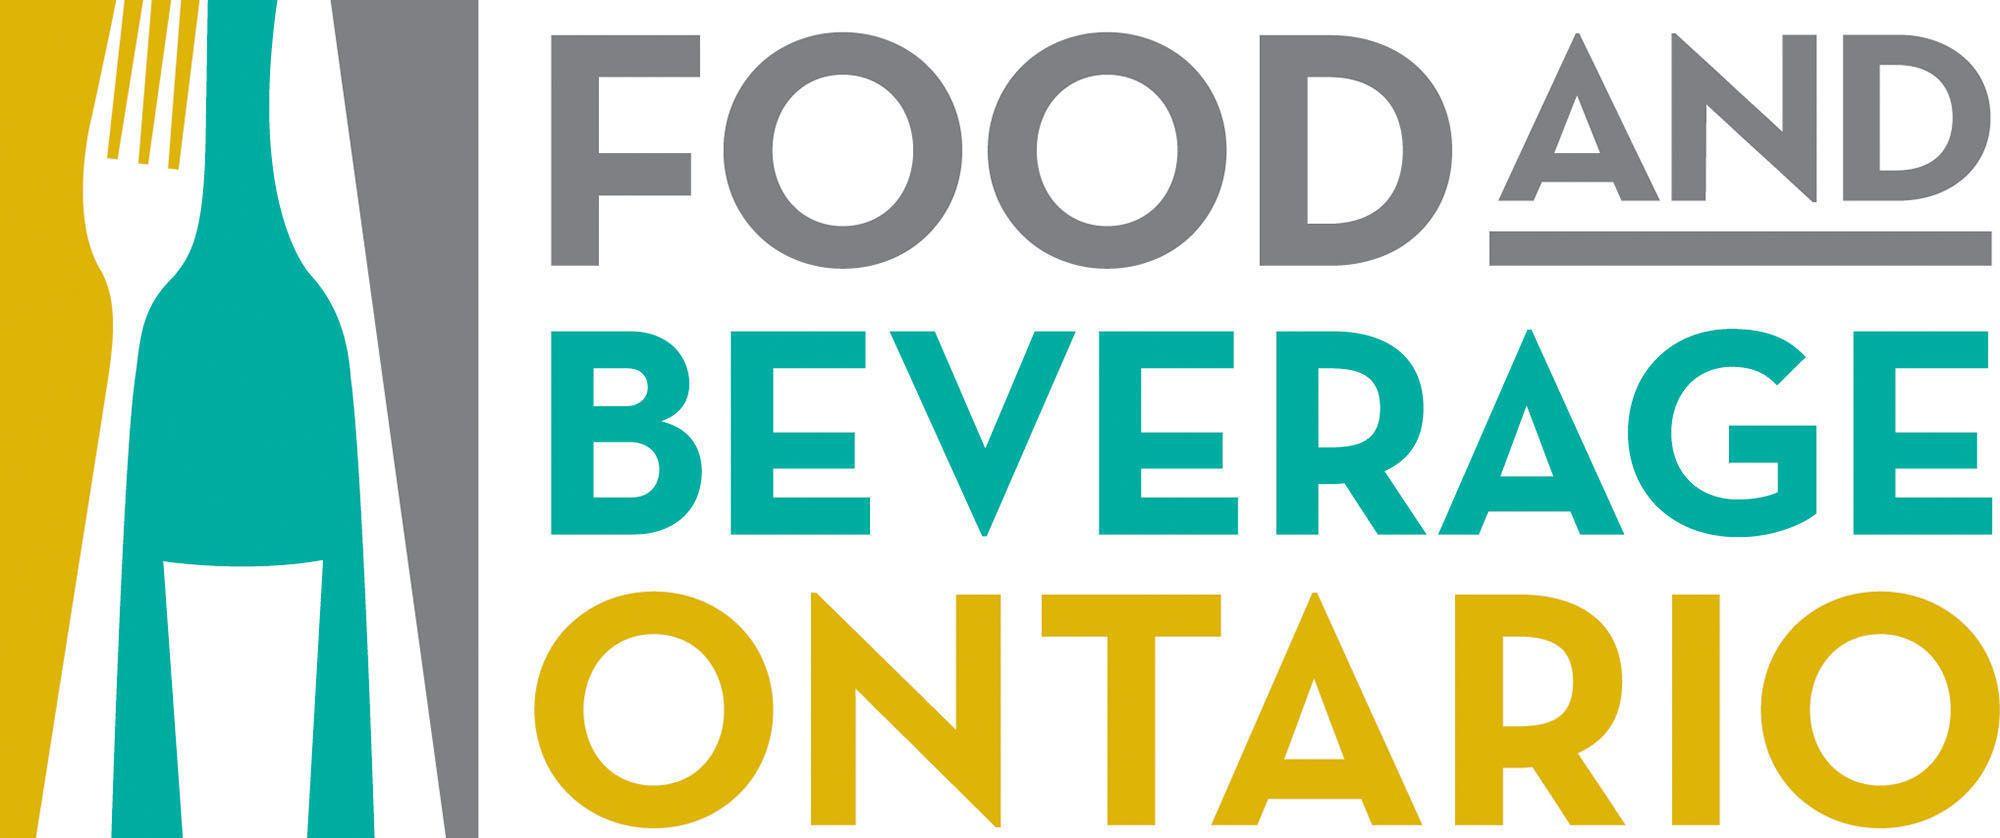 Food and Beverage Company Logo - CNW | Food and beverage processors unveil fresh logo, exciting new ...